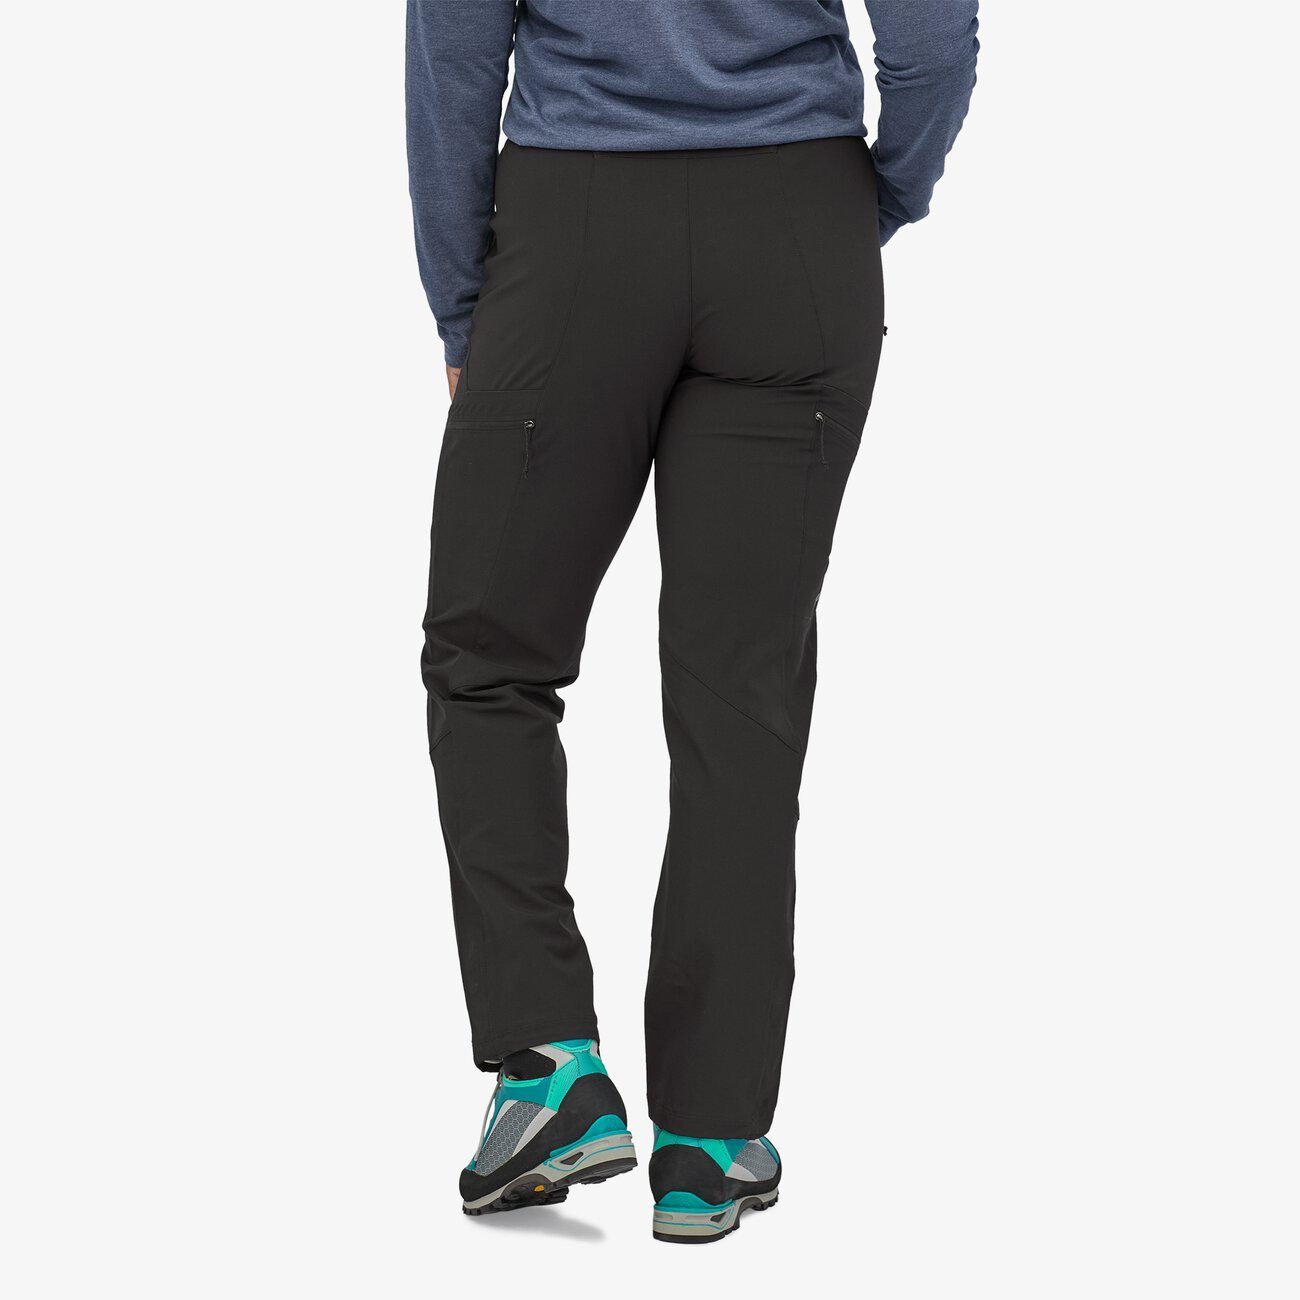 Patagonia W's Simul Alpine Pants - Recycled Polyester Black Pants